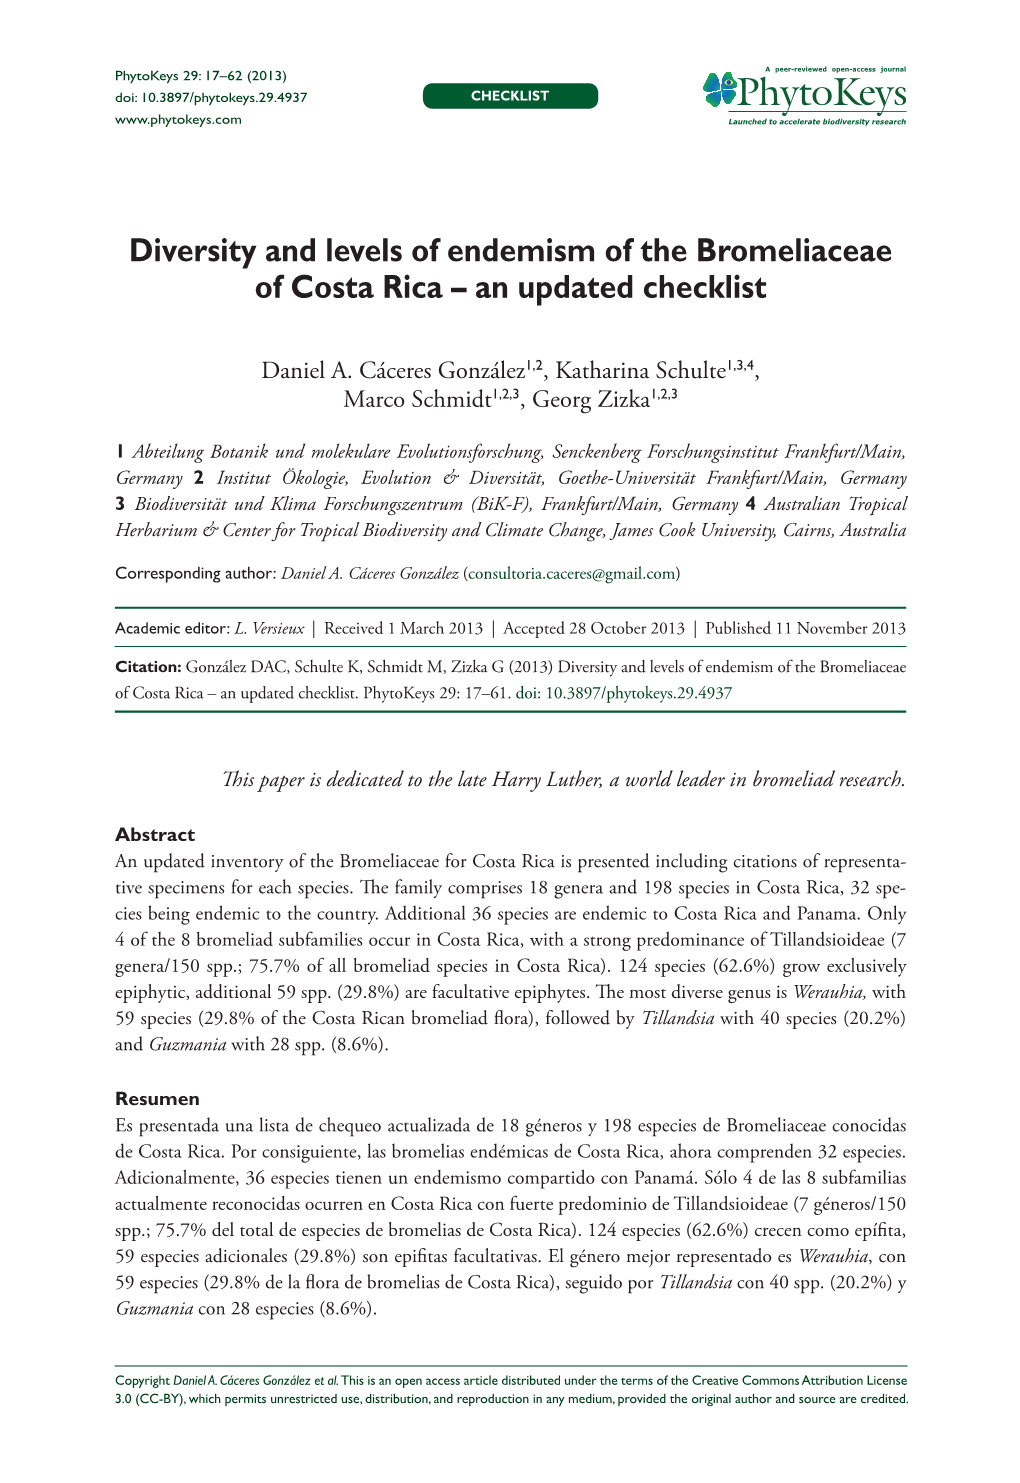 Diversity and Levels of Endemism of the Bromeliaceae of Costa Rica – an Updated Checklist